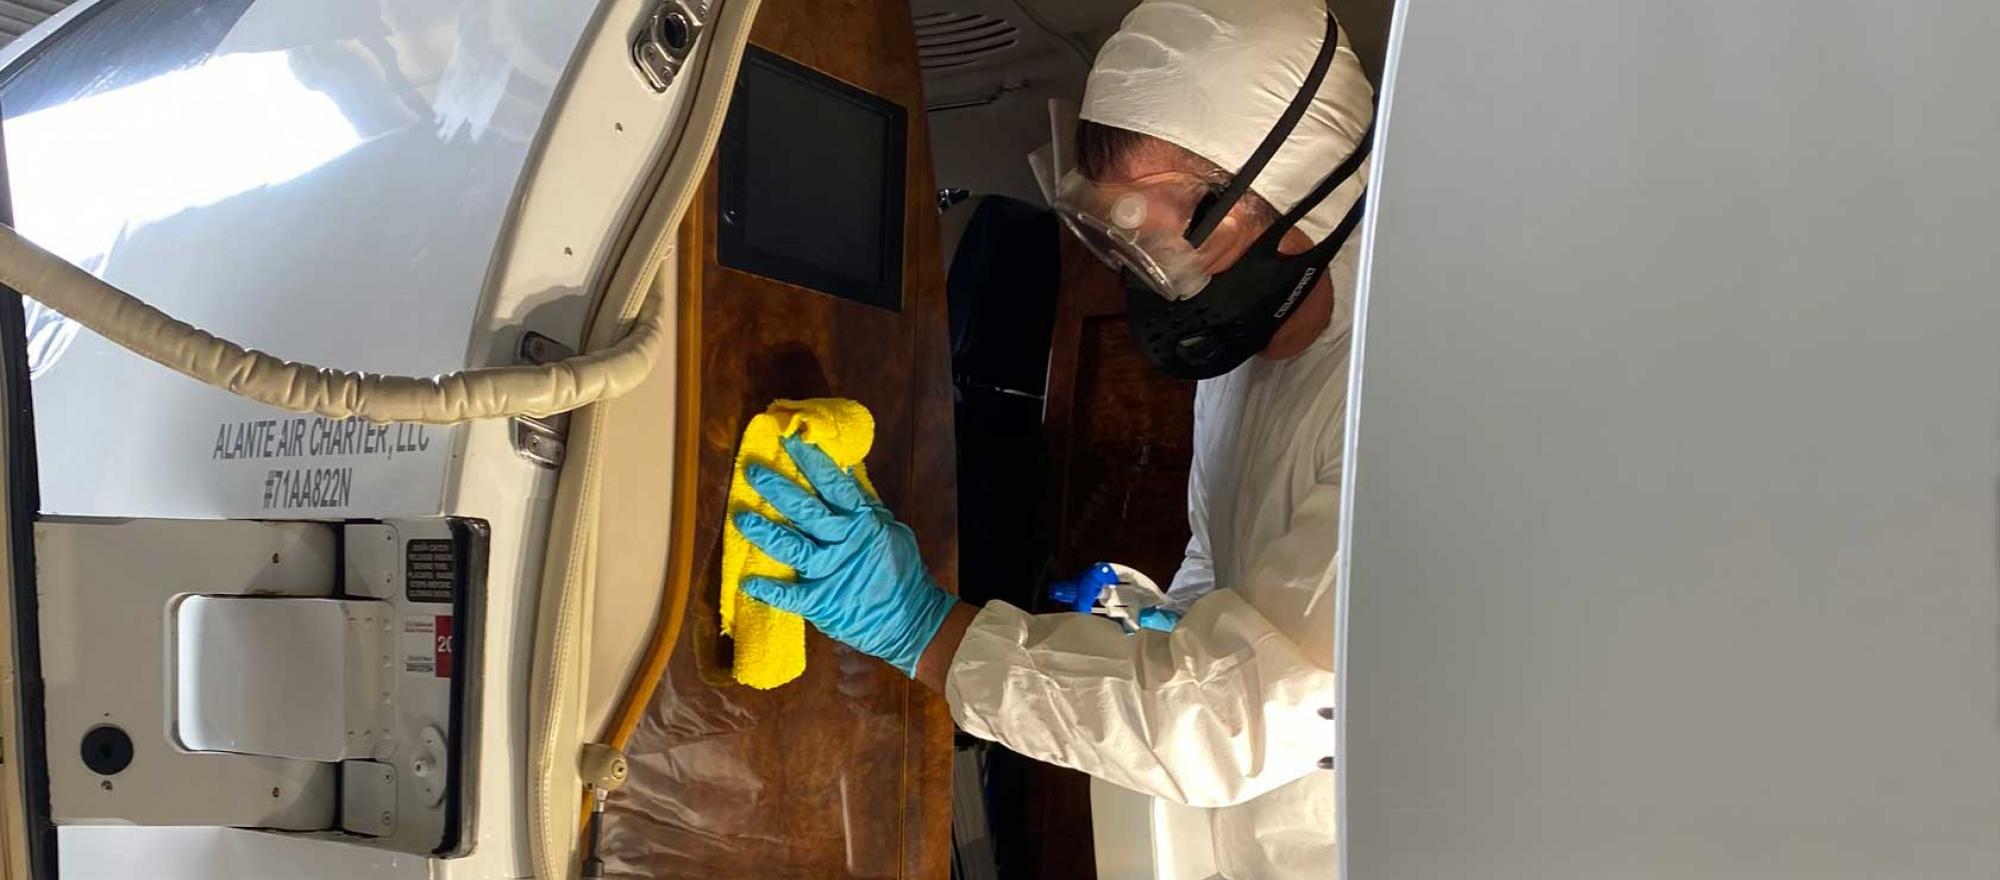 Worker disinfecting aircraft